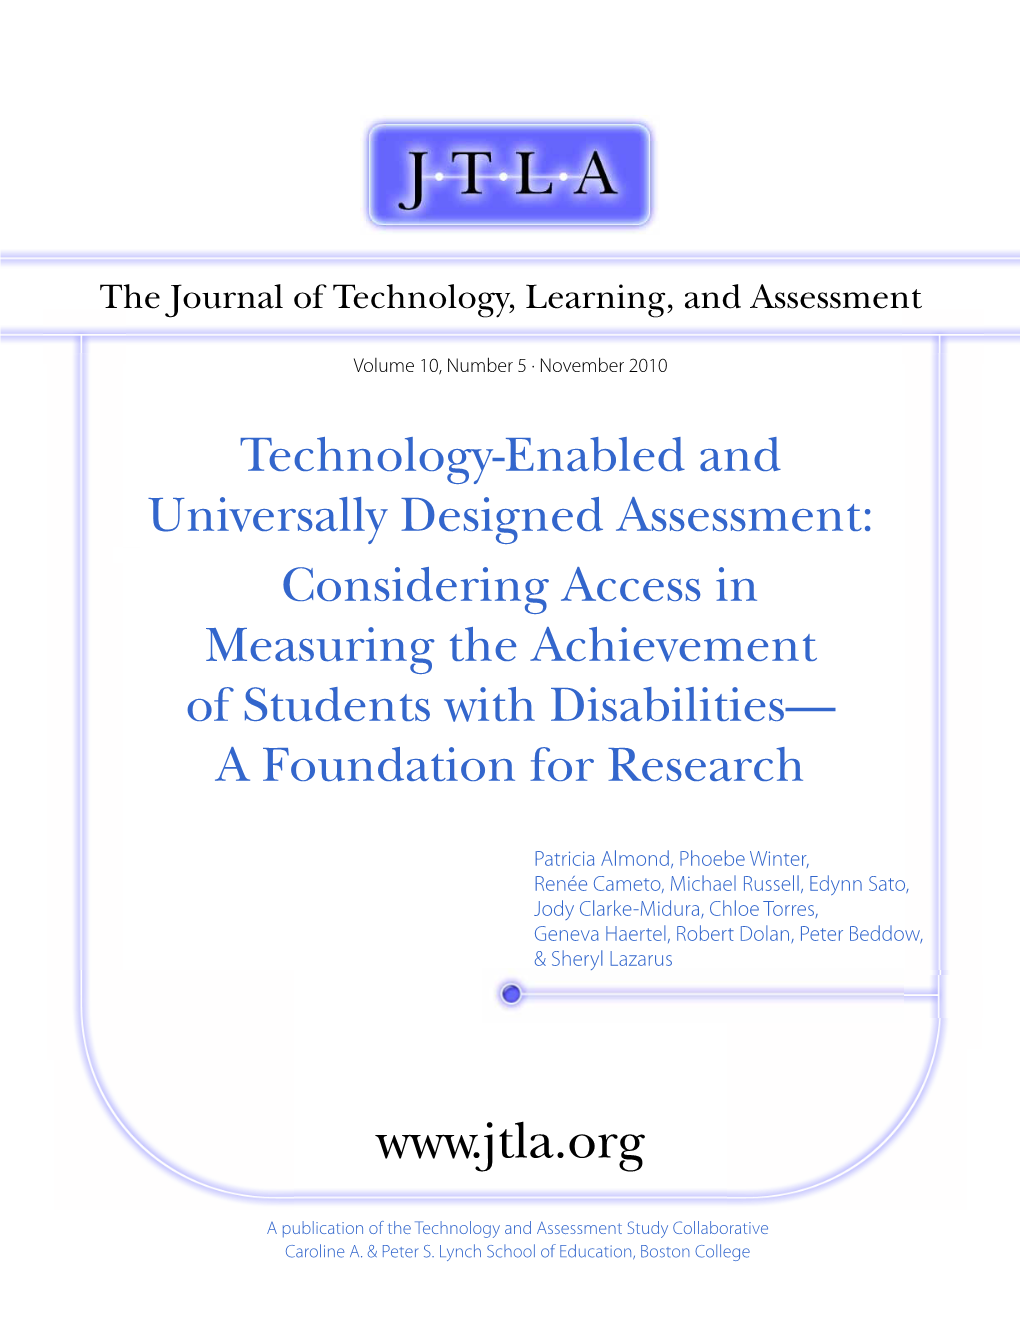 Technology-Enabled and Universally Designed Assessment: Considering Access in Measuring the Achievement of Students with Disabilities— a Foundation for Research